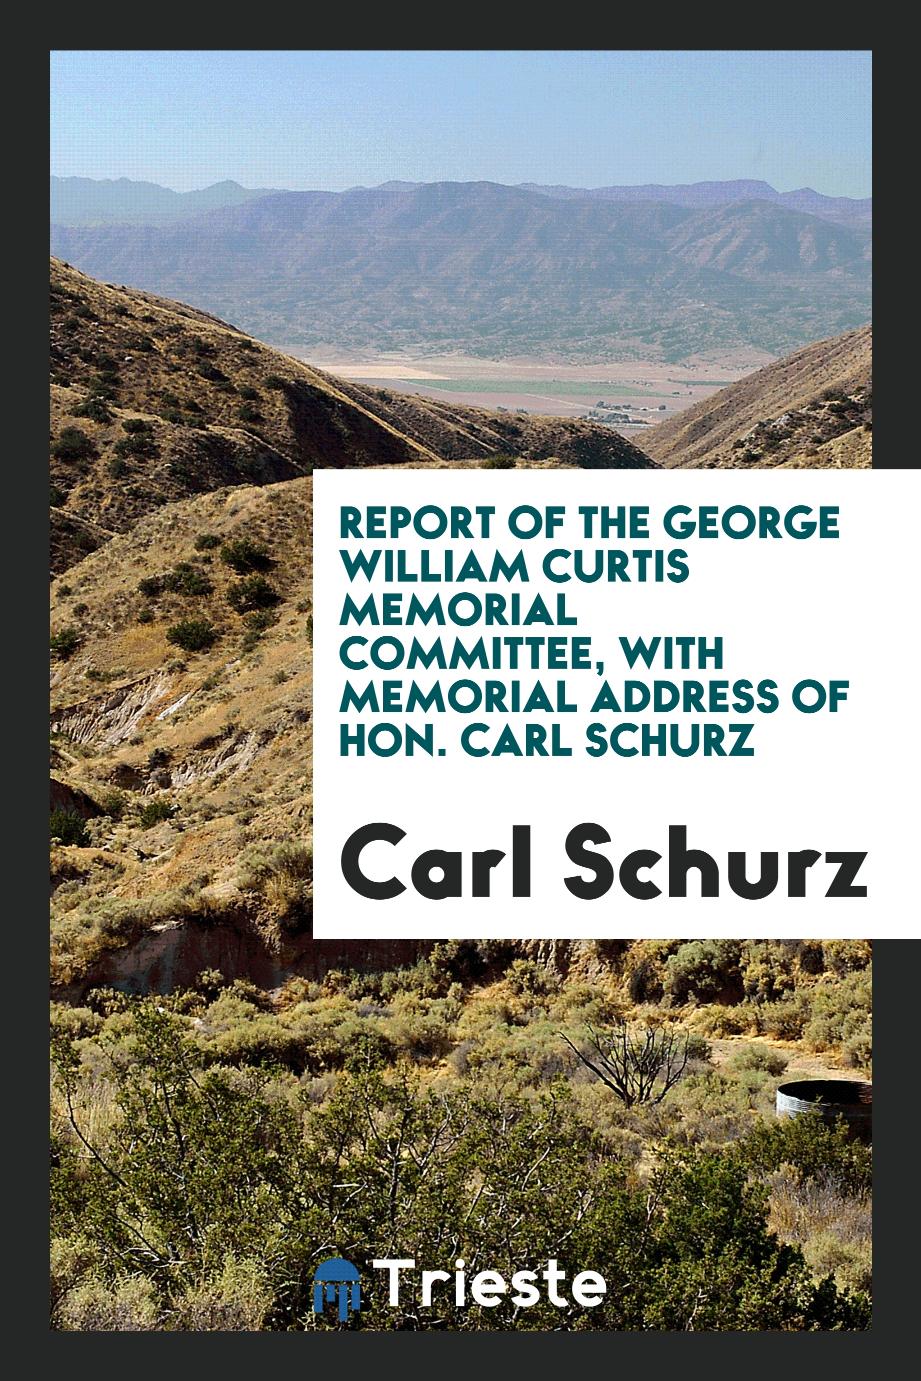 Report of the George William Curtis Memorial Committee, with memorial address of Hon. Carl Schurz